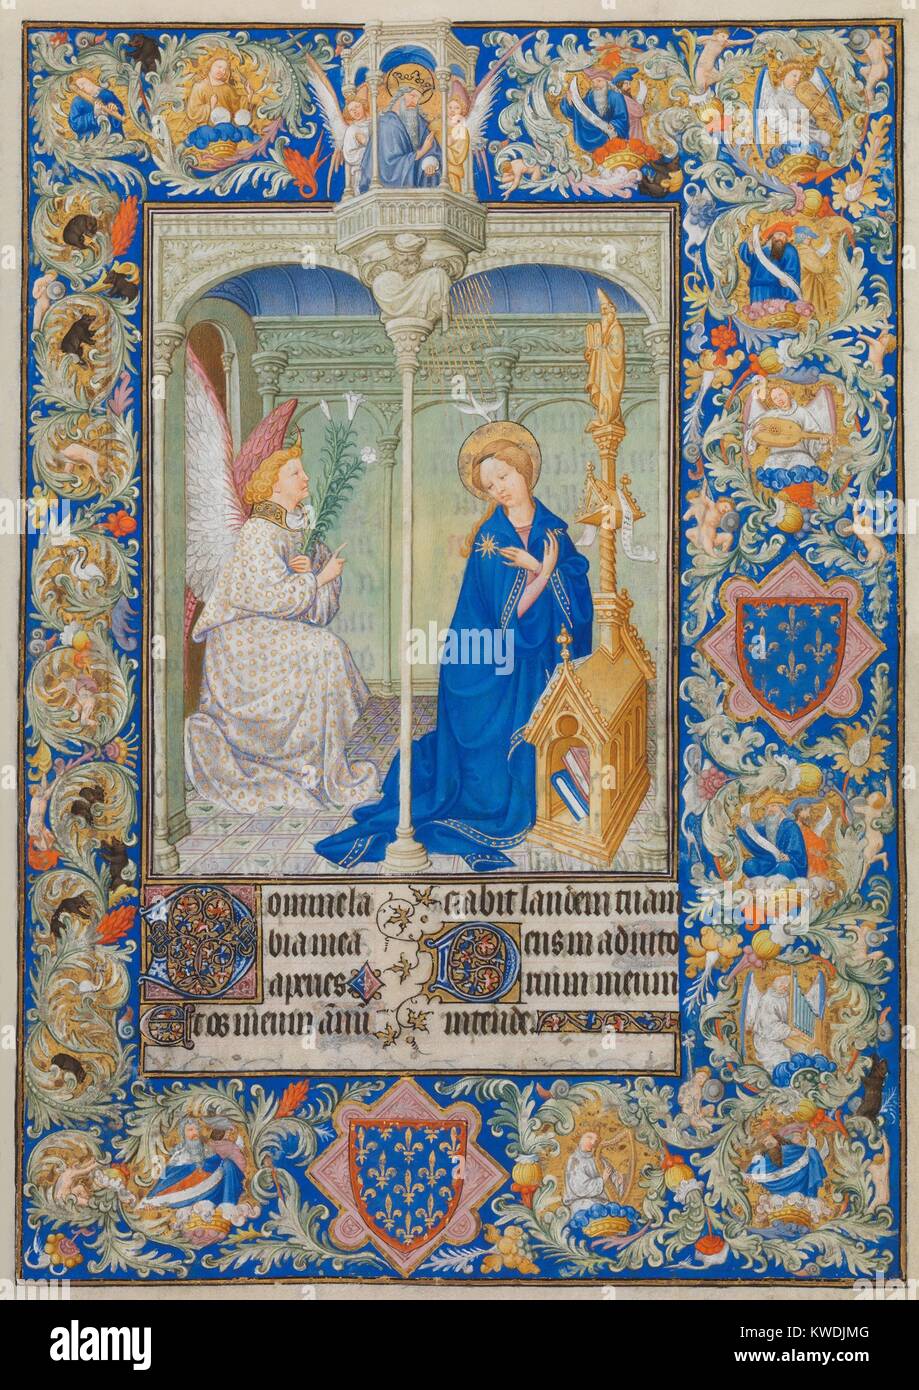 BELLES HEURES OF JEAN DE BERRY, by Limbourg Brothers, 1405-09,French painting, Northern Renaissance. An Annunciation page from an illuminated manuscript. The central scene is bordered by a complex interlace of plant forms, animals, figures, and angels playing musical instruments (BSLOC 2017 16 90) Stock Photo